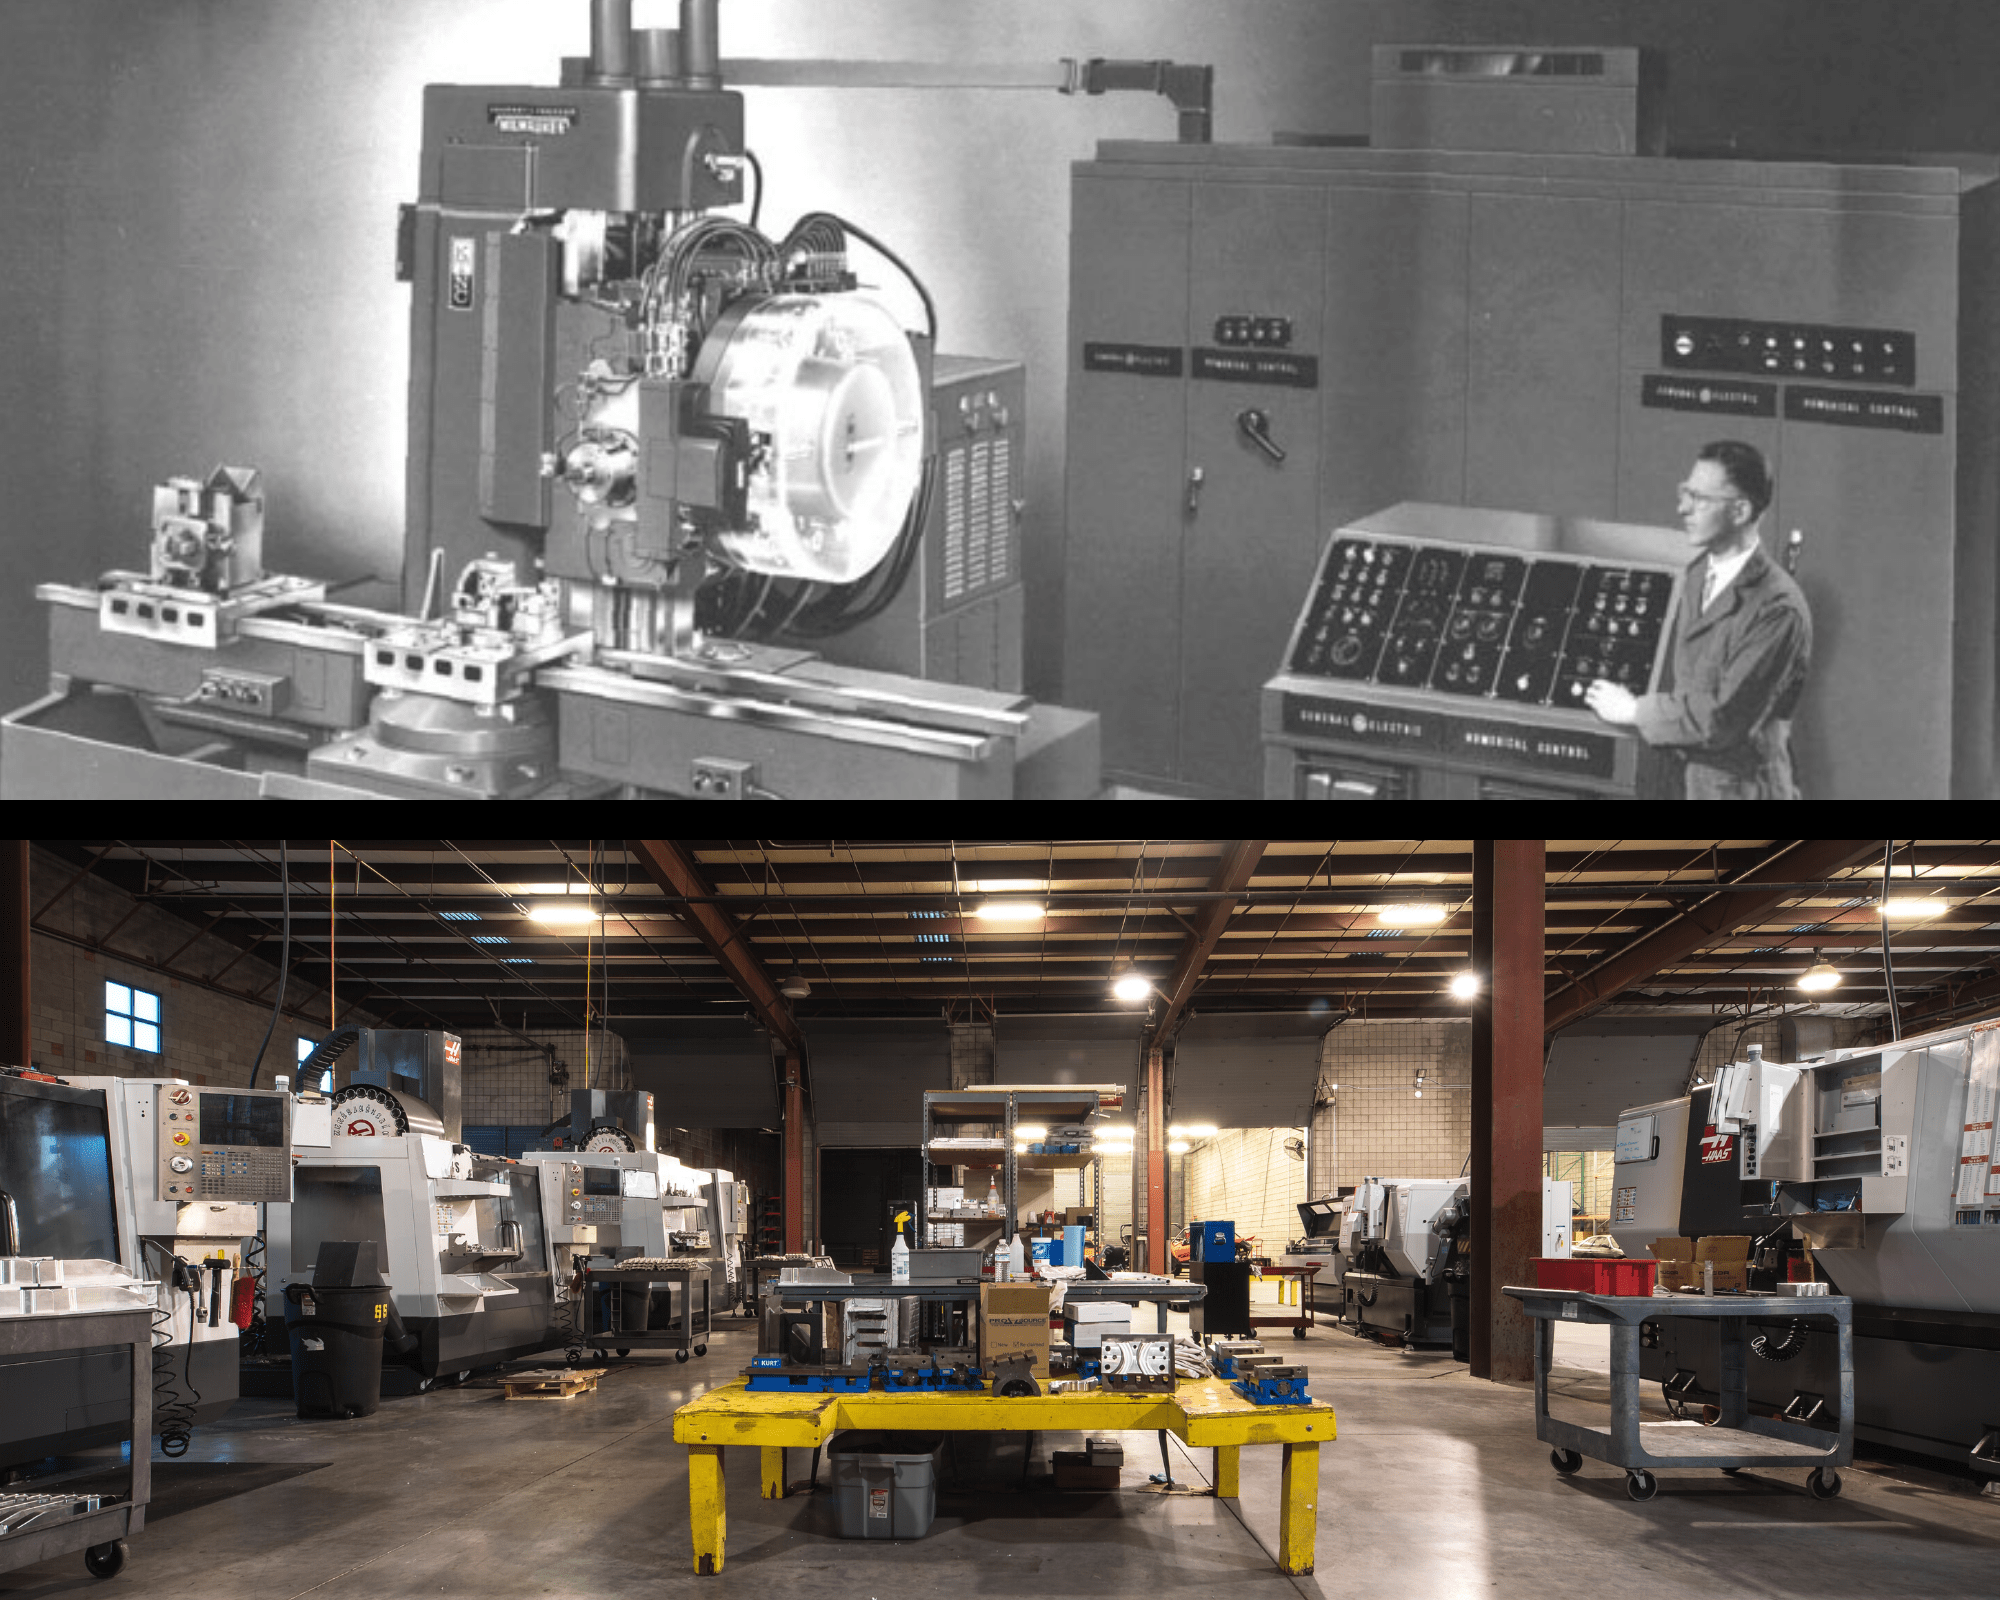 photo collage. Top is old CNC machine and bottom is modern CNC machines.